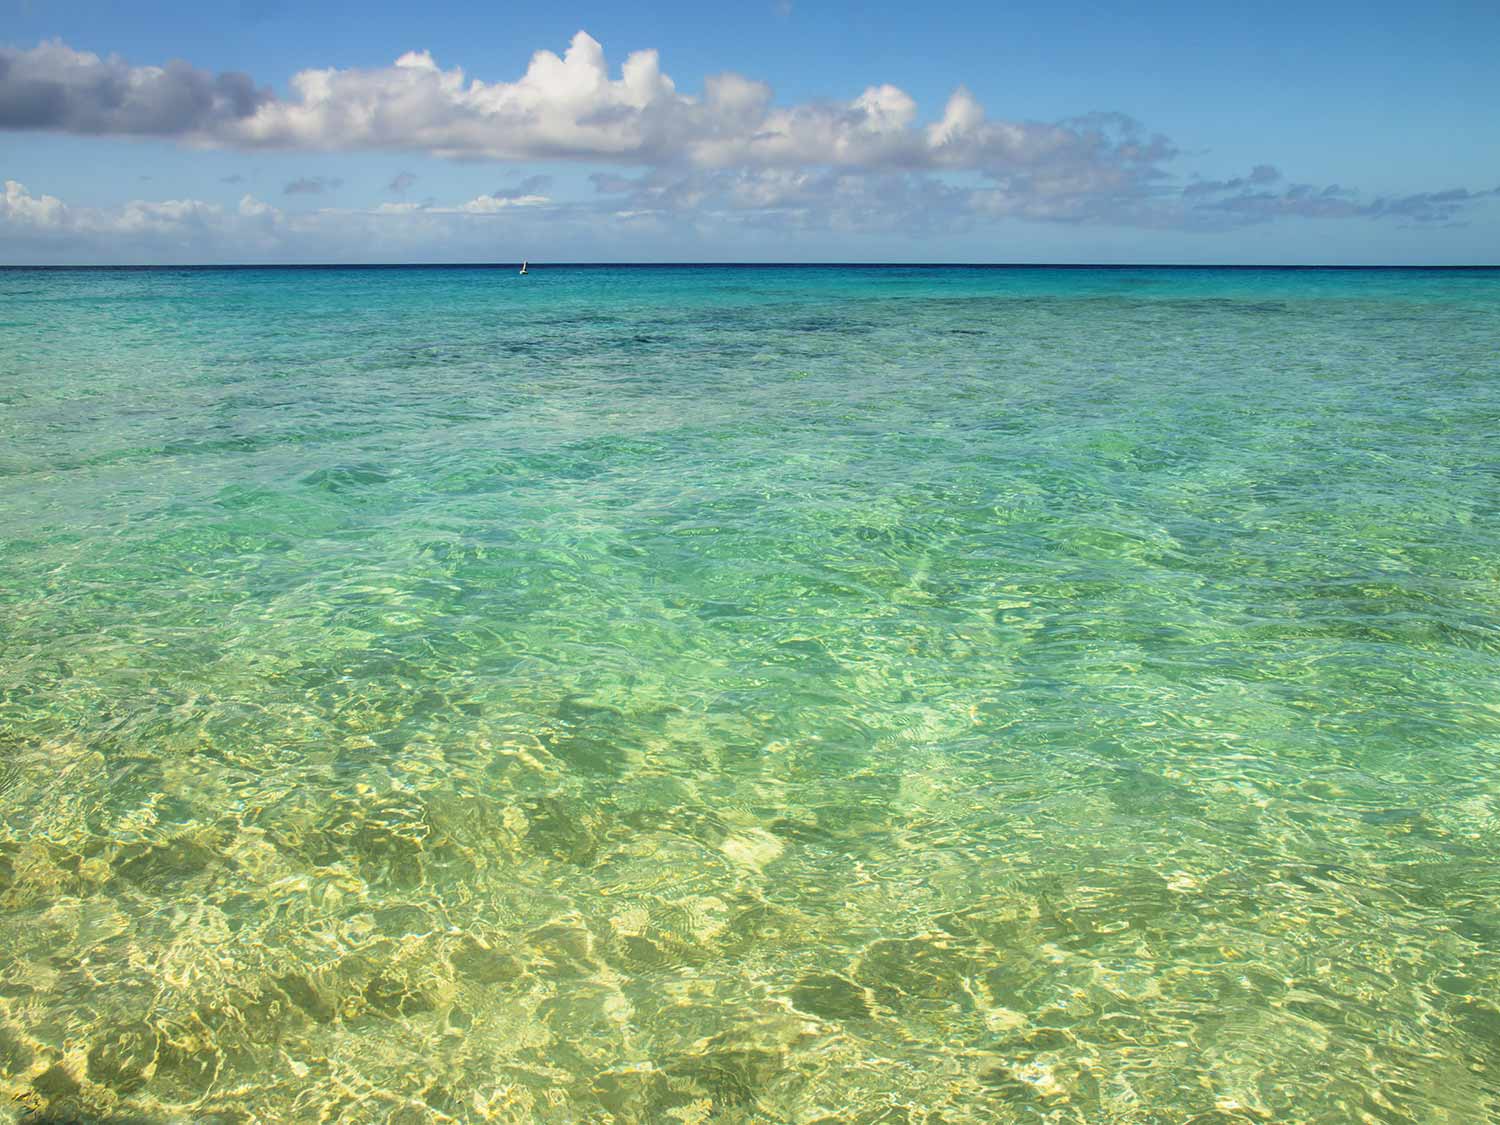 Governor’s Beach in Turks and Caicos is widely regarded as the best beach on Grand Turk.